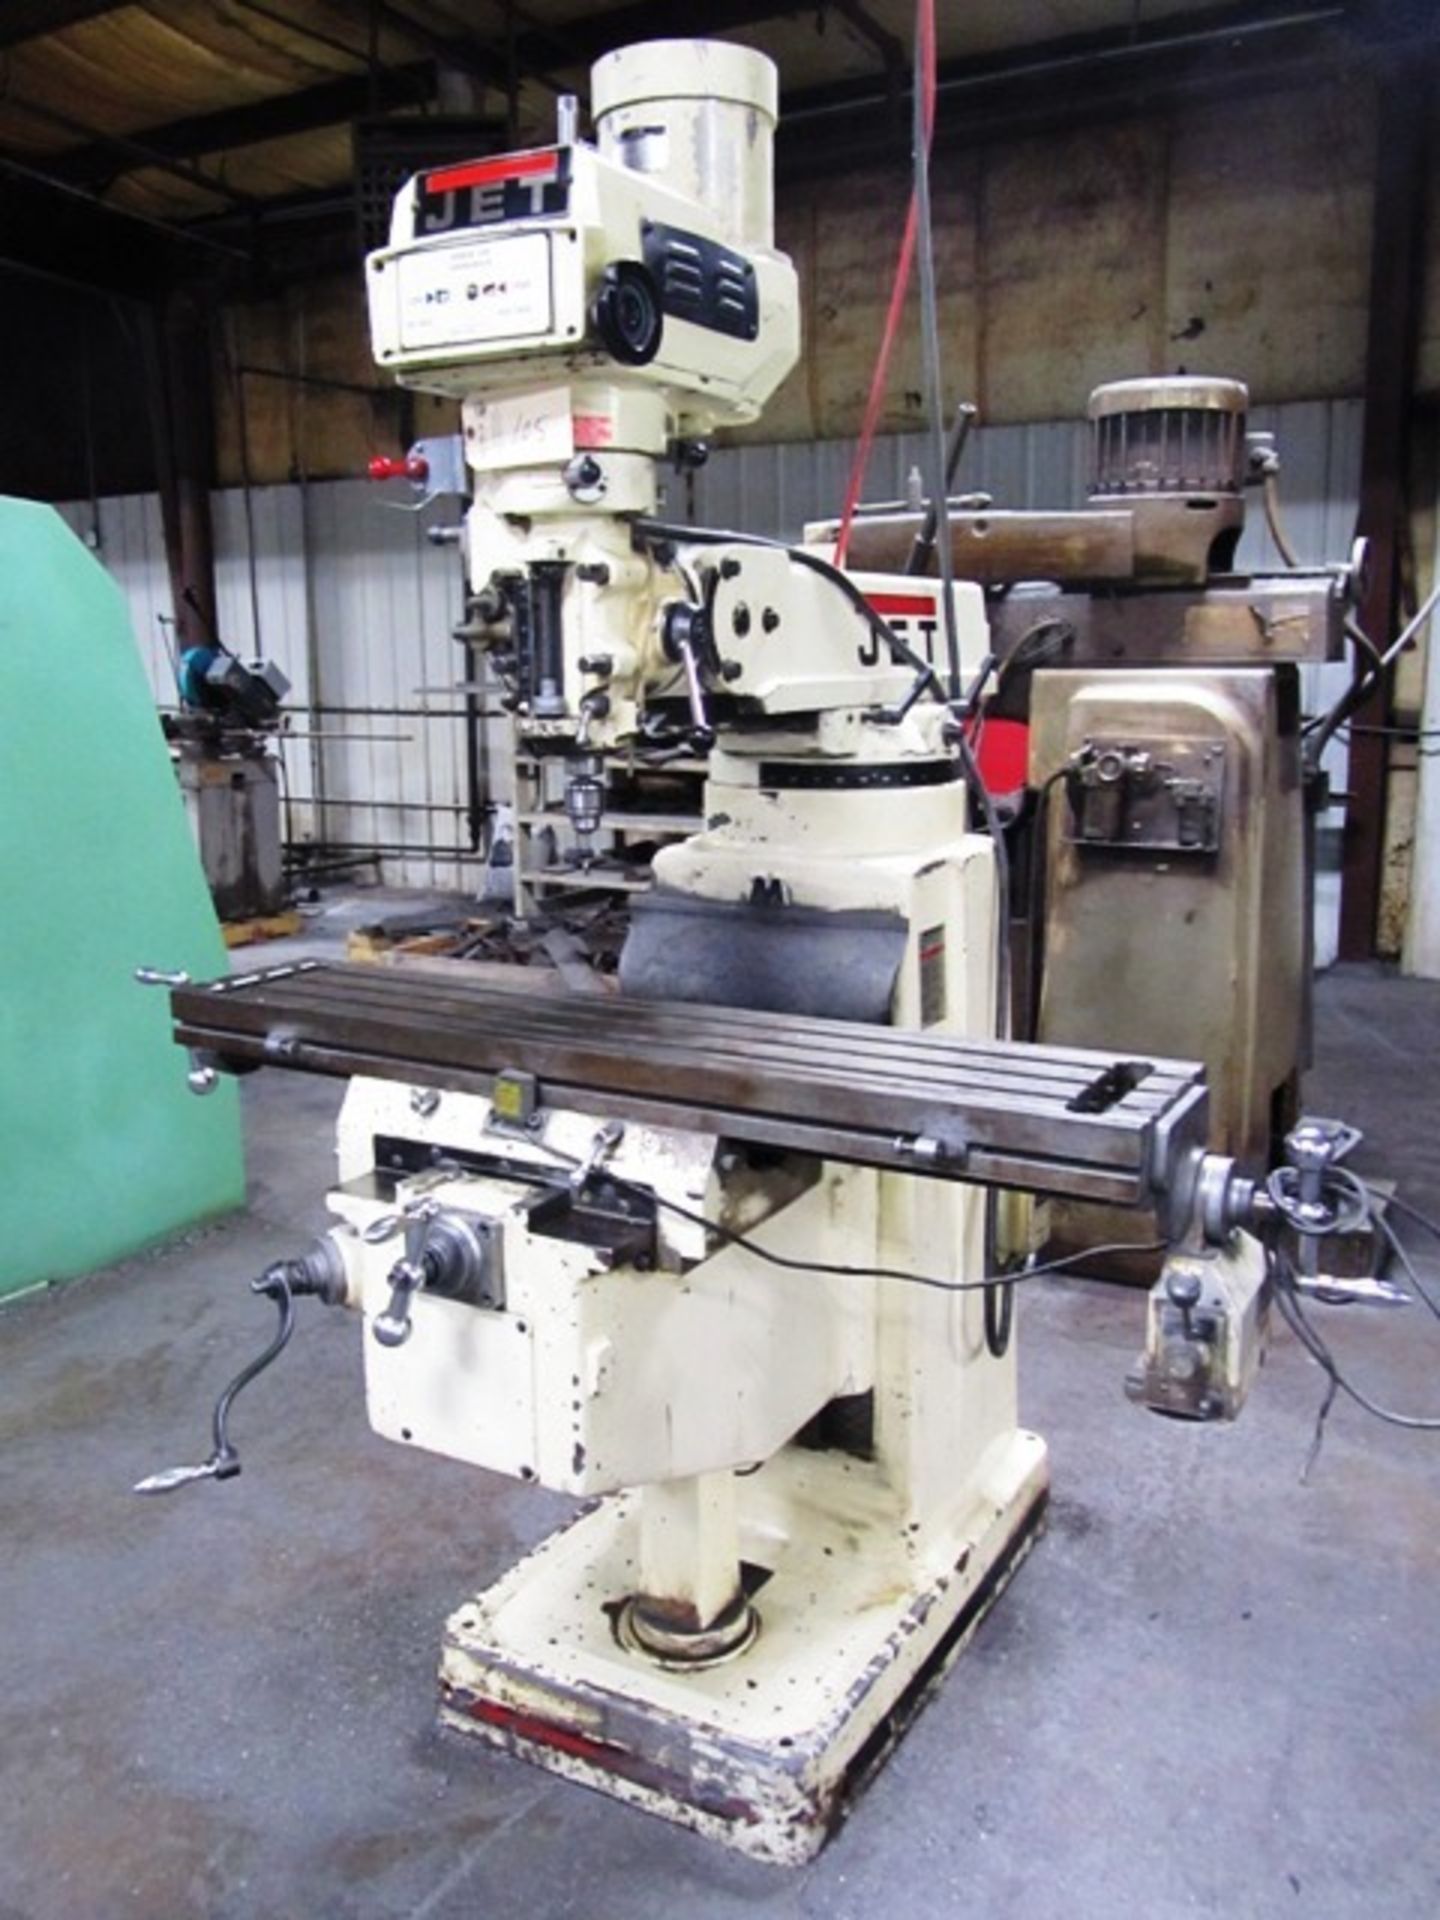 Jet Variable Speed Vertical Milling Machine with 12'' x 48'' Power Feed Table, Variable Spindle